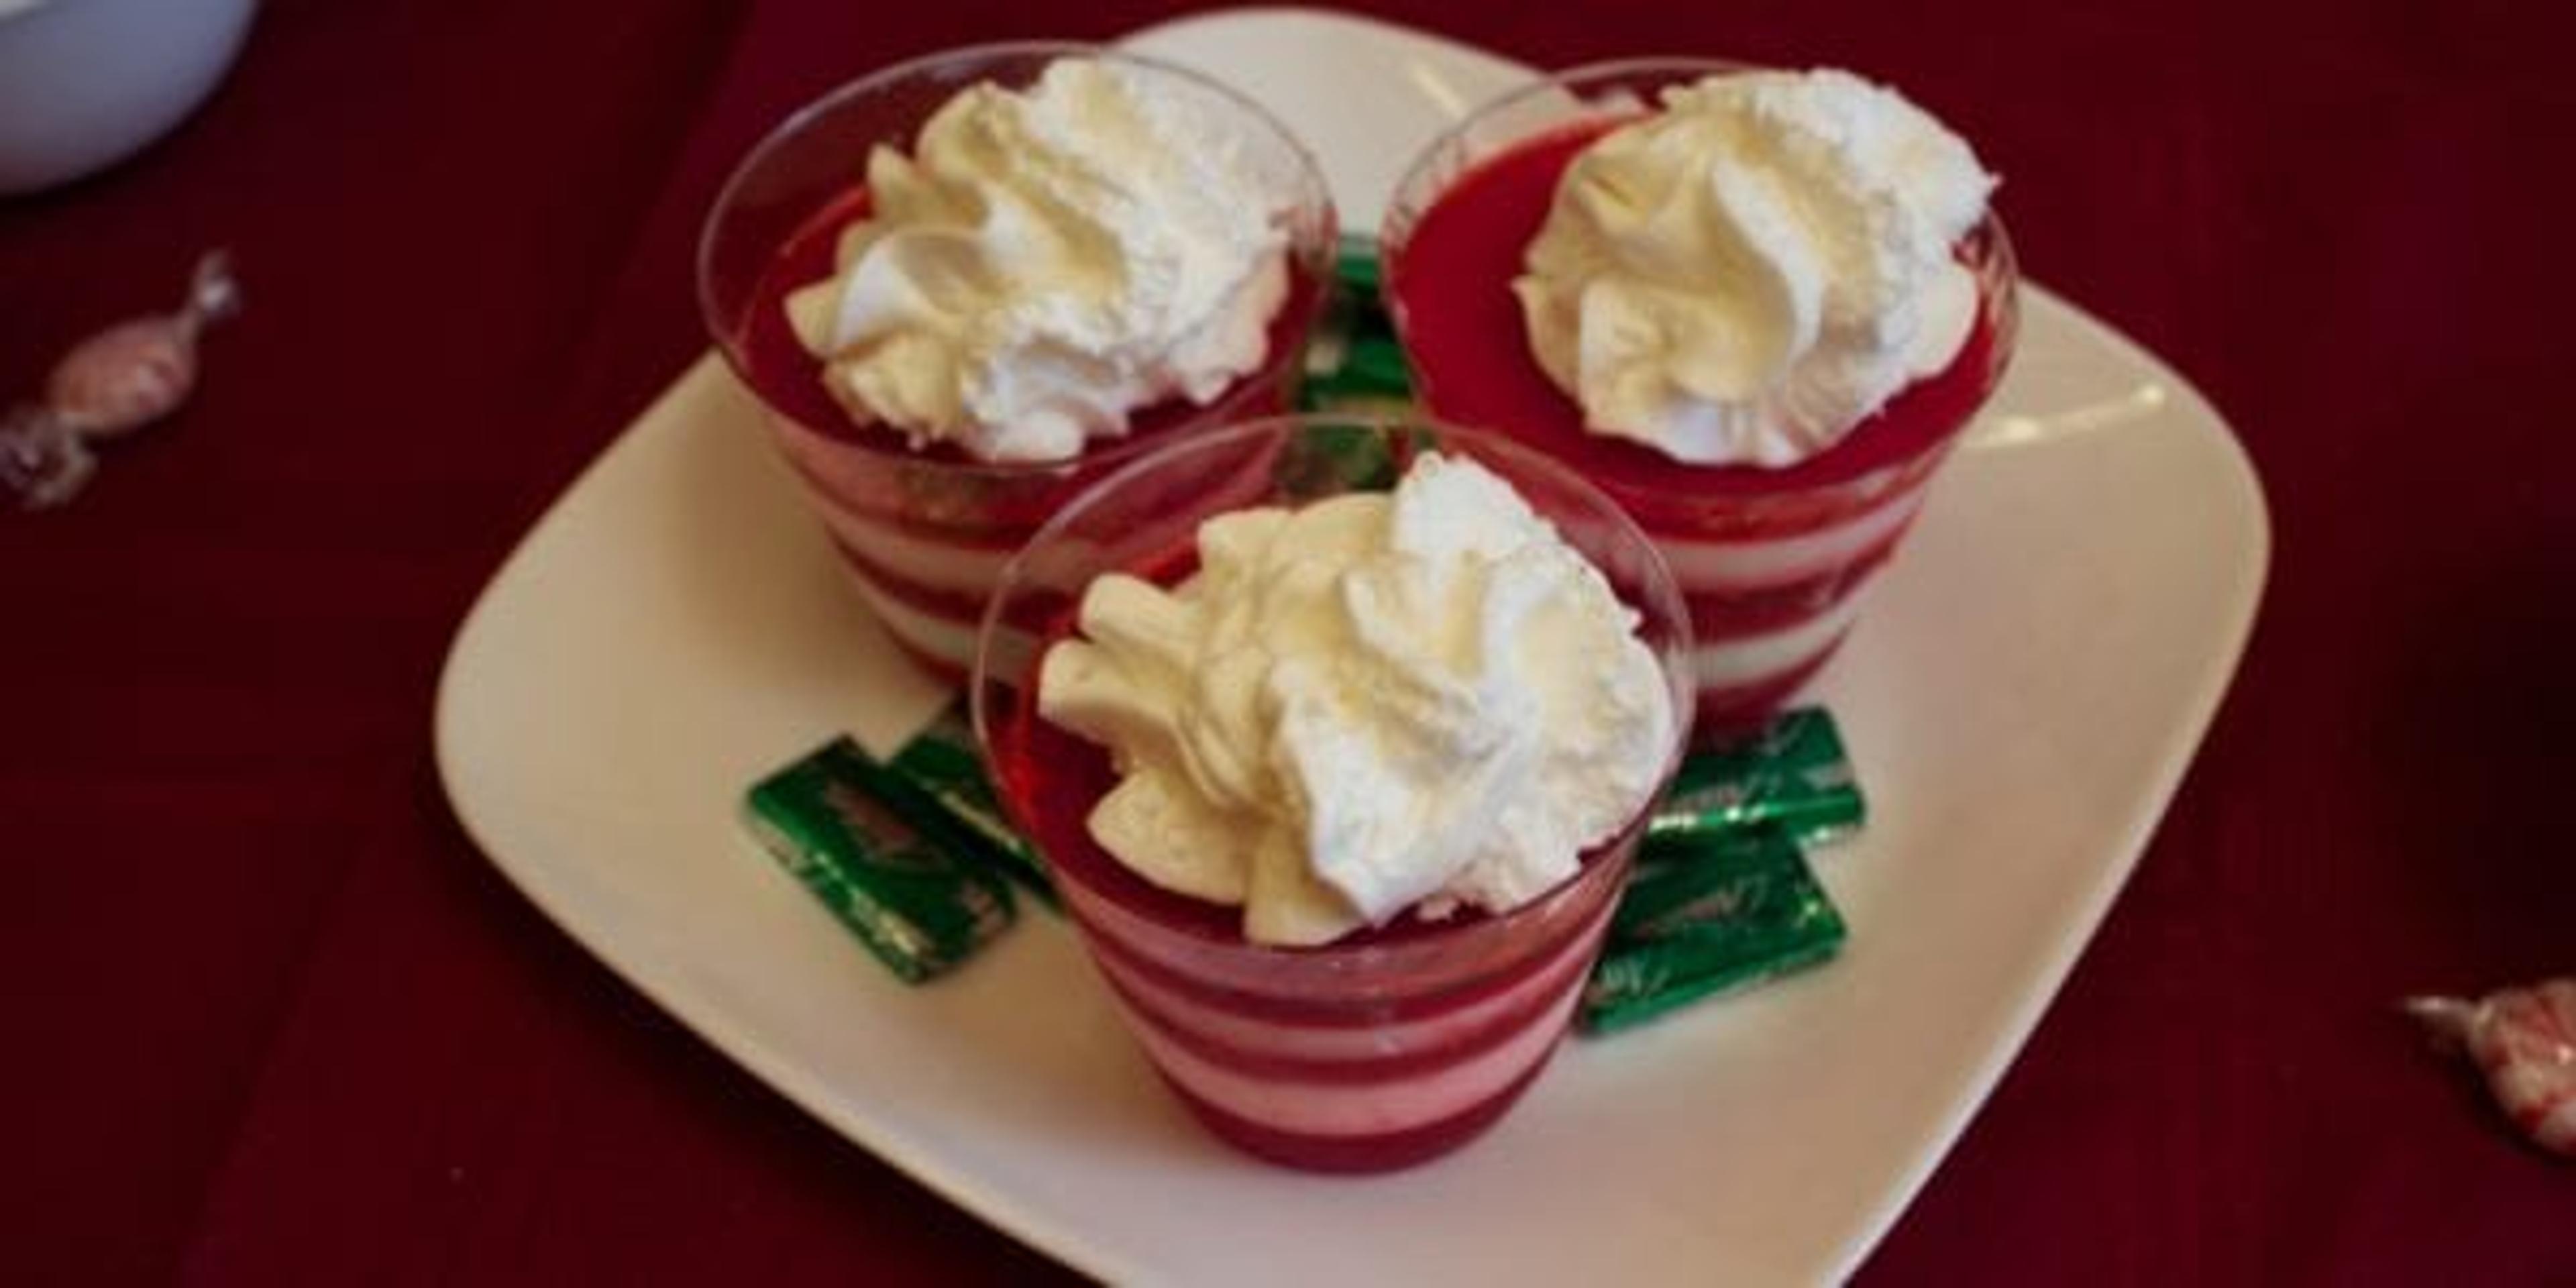 Image of red and white gelatin cups